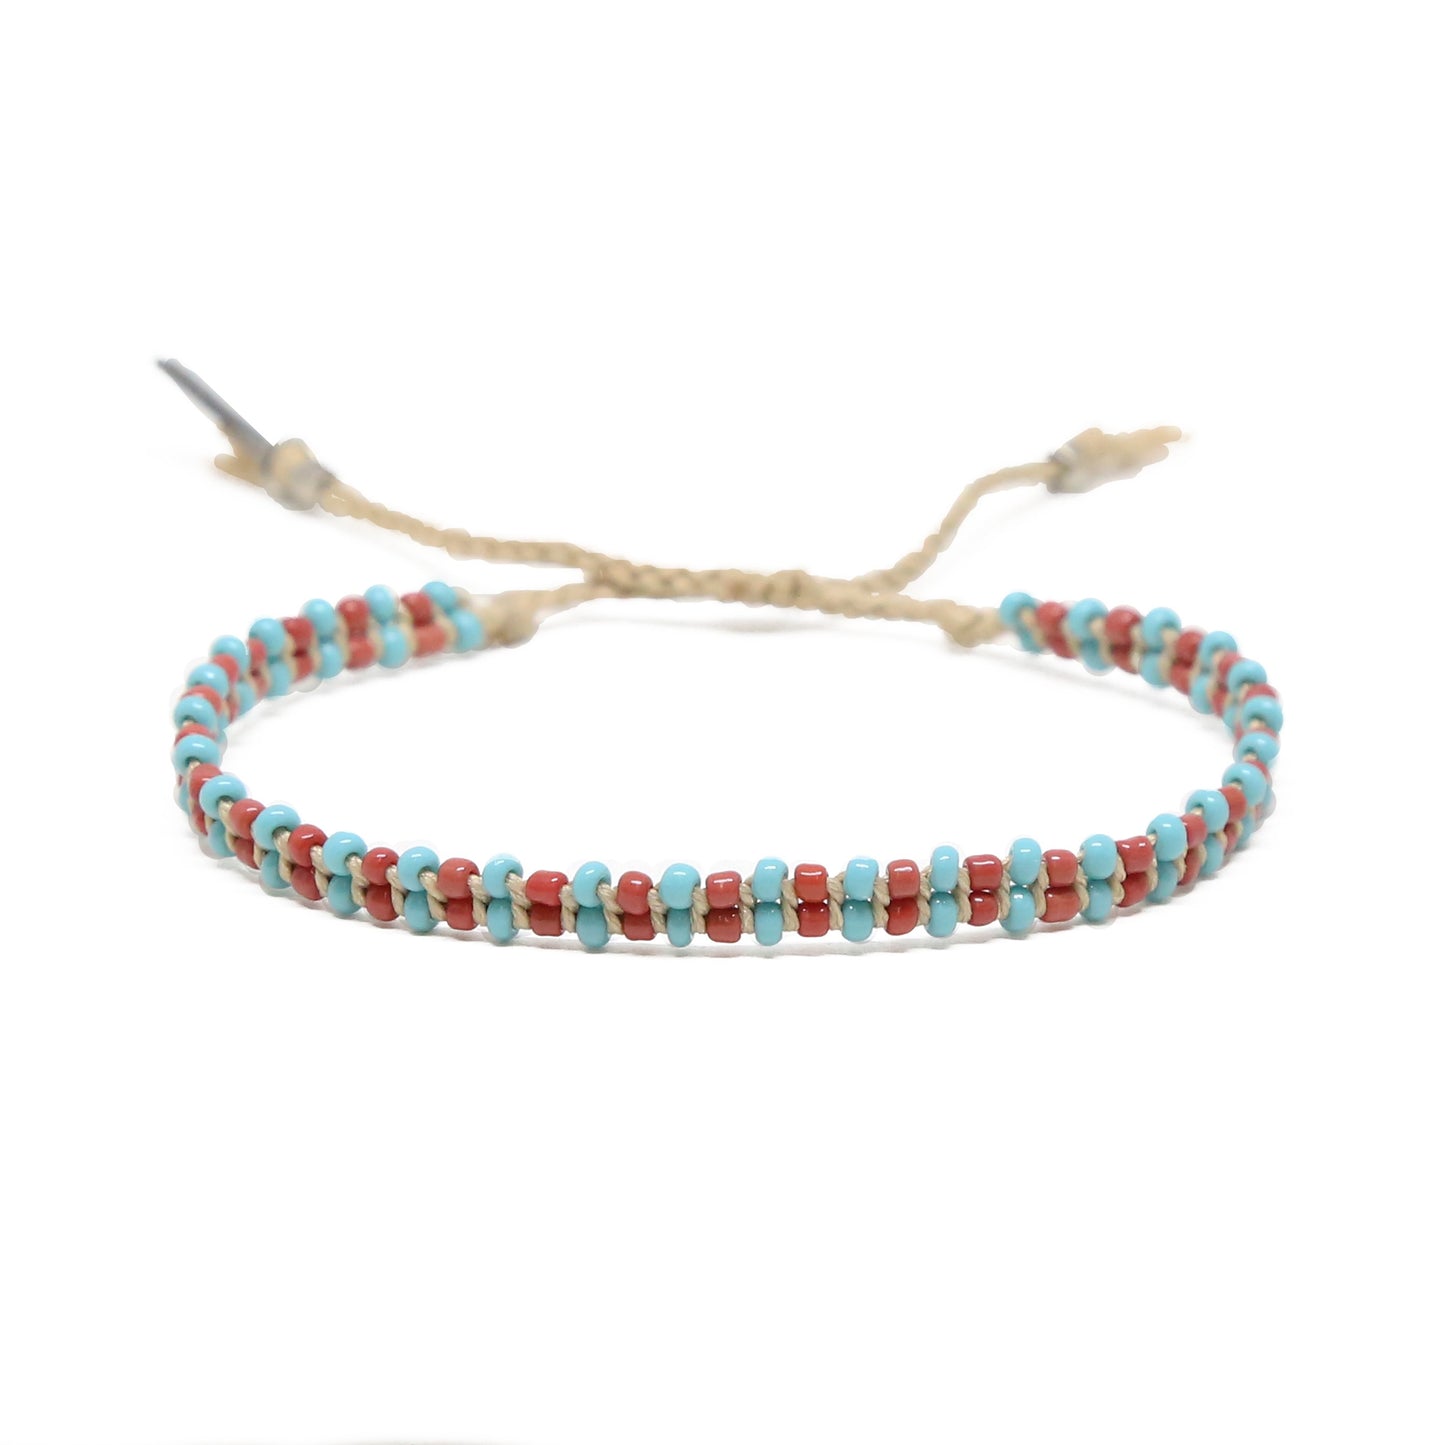 About Those Vibes Bracelet in Turquoise, Brown, and Tan